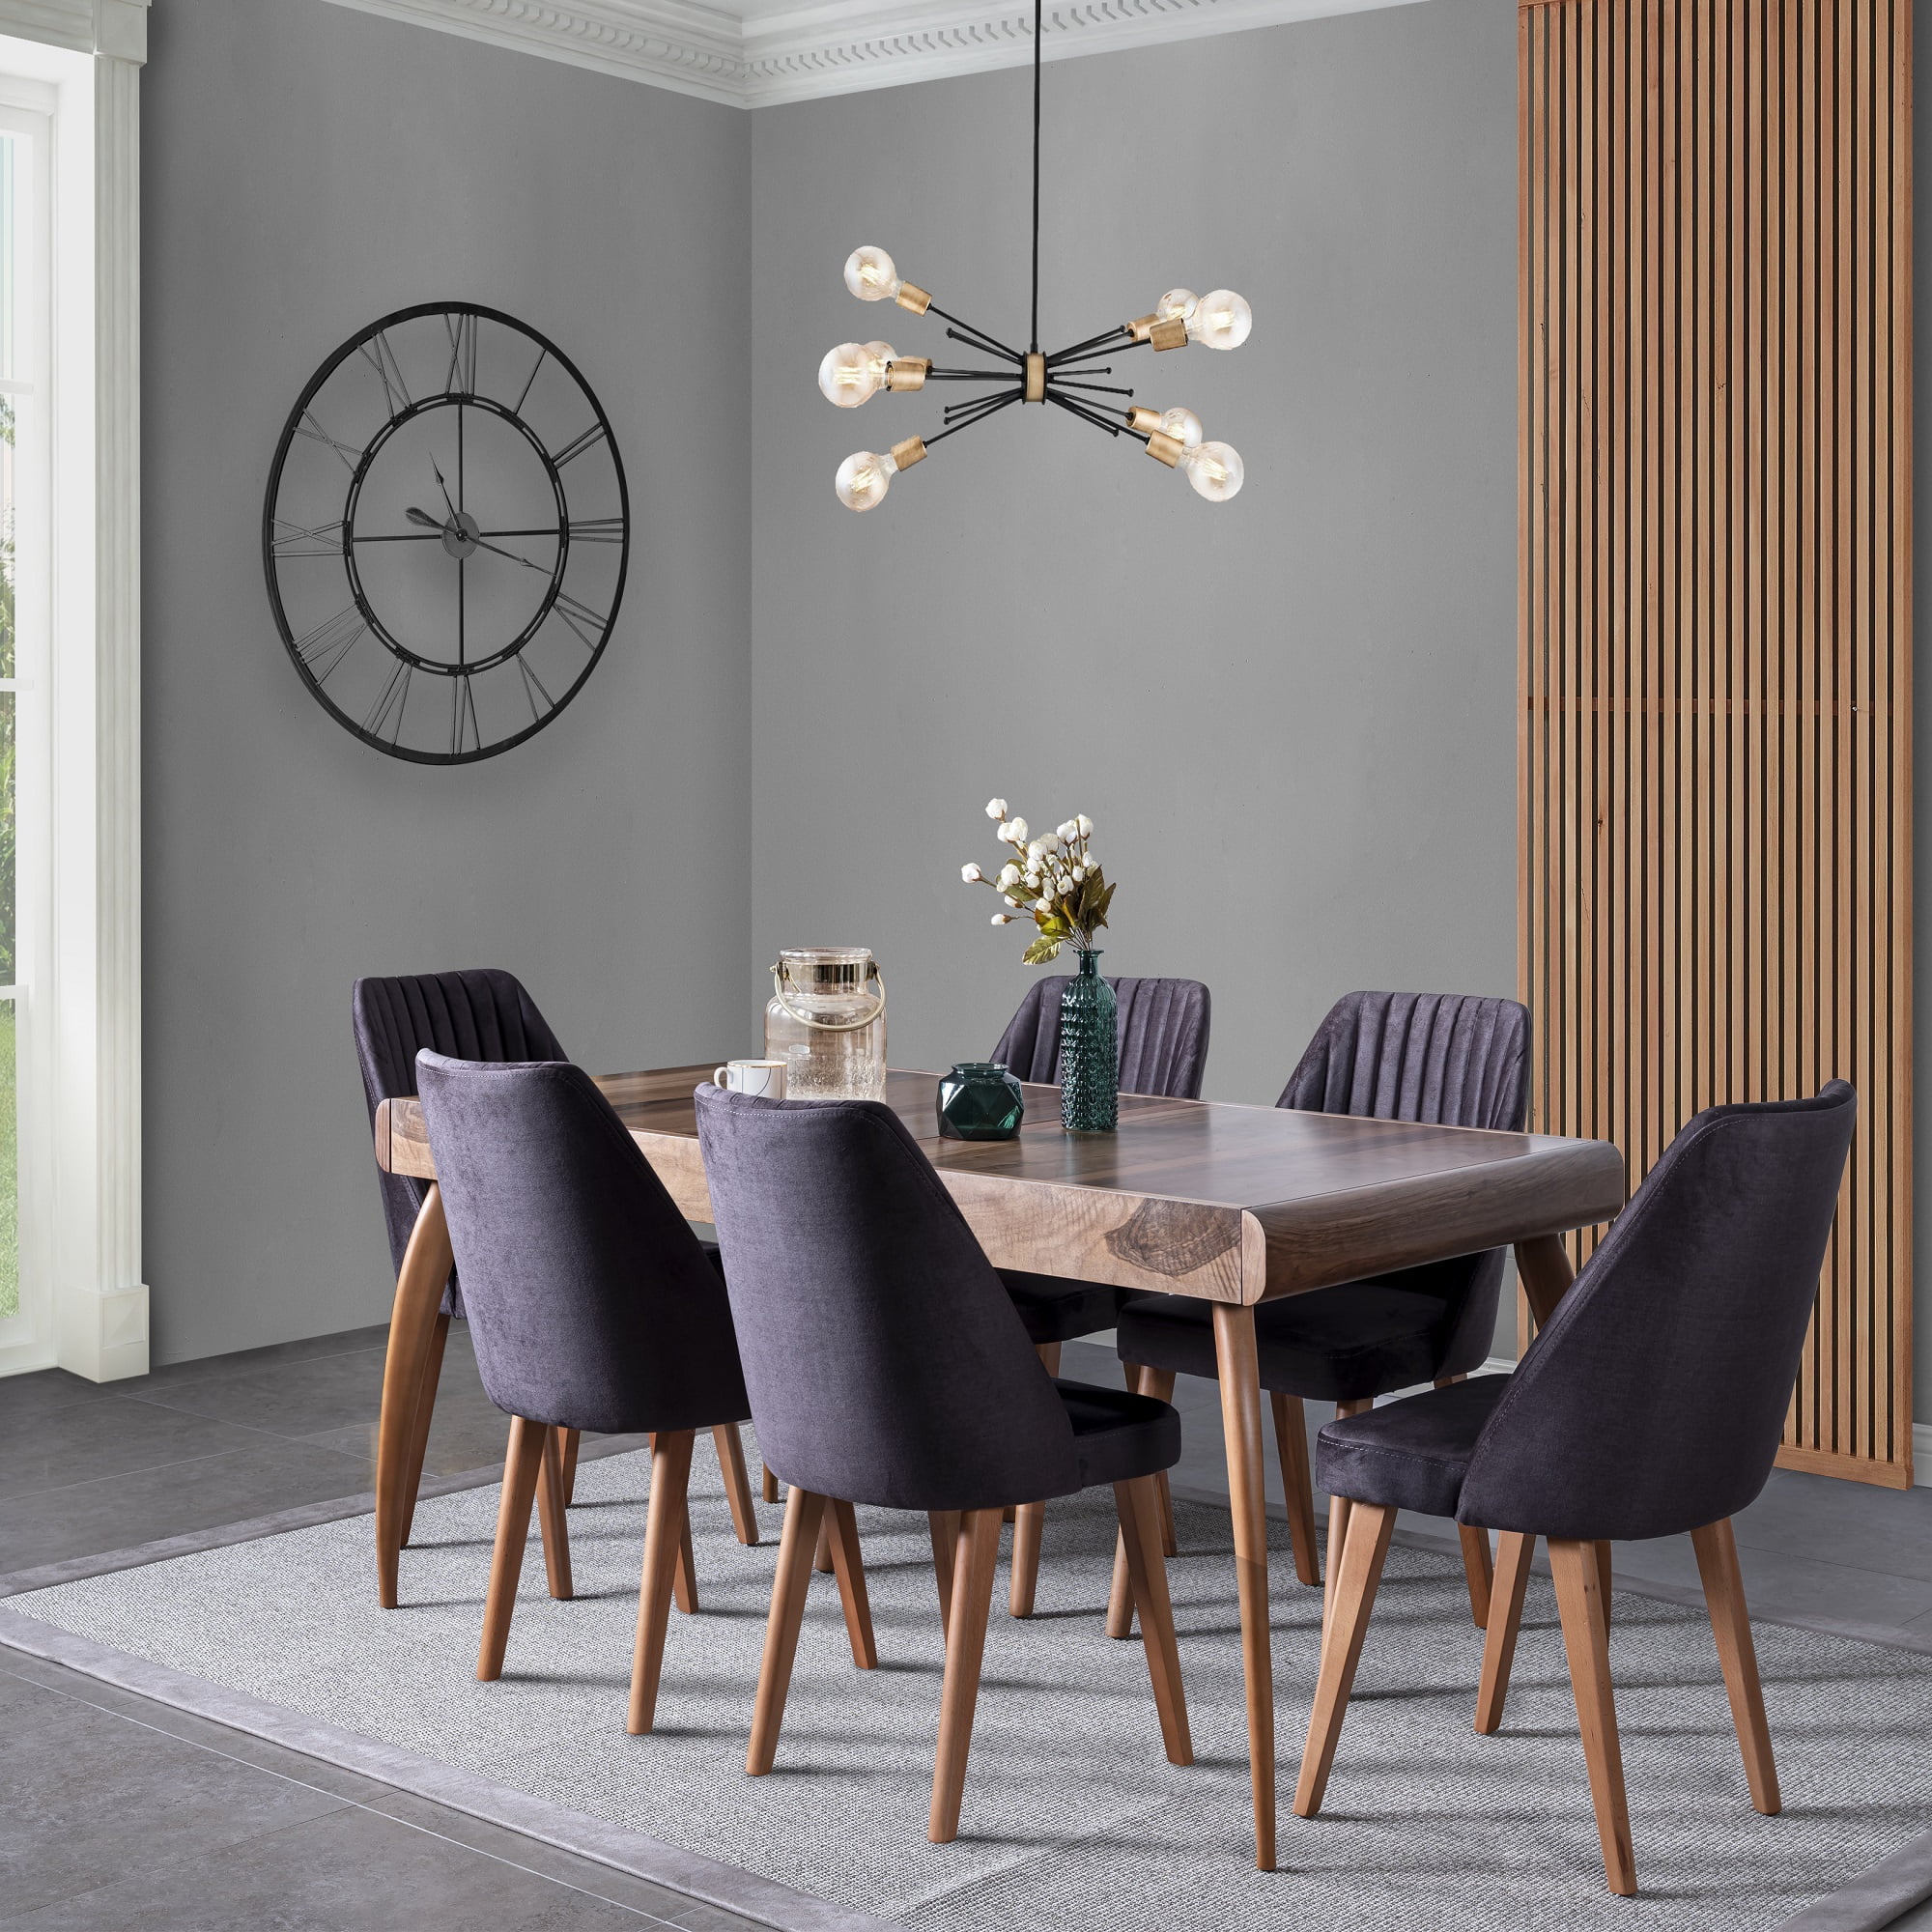 Luxurious Modern Dining Room Furniture, Dining Room Chairs Walnut